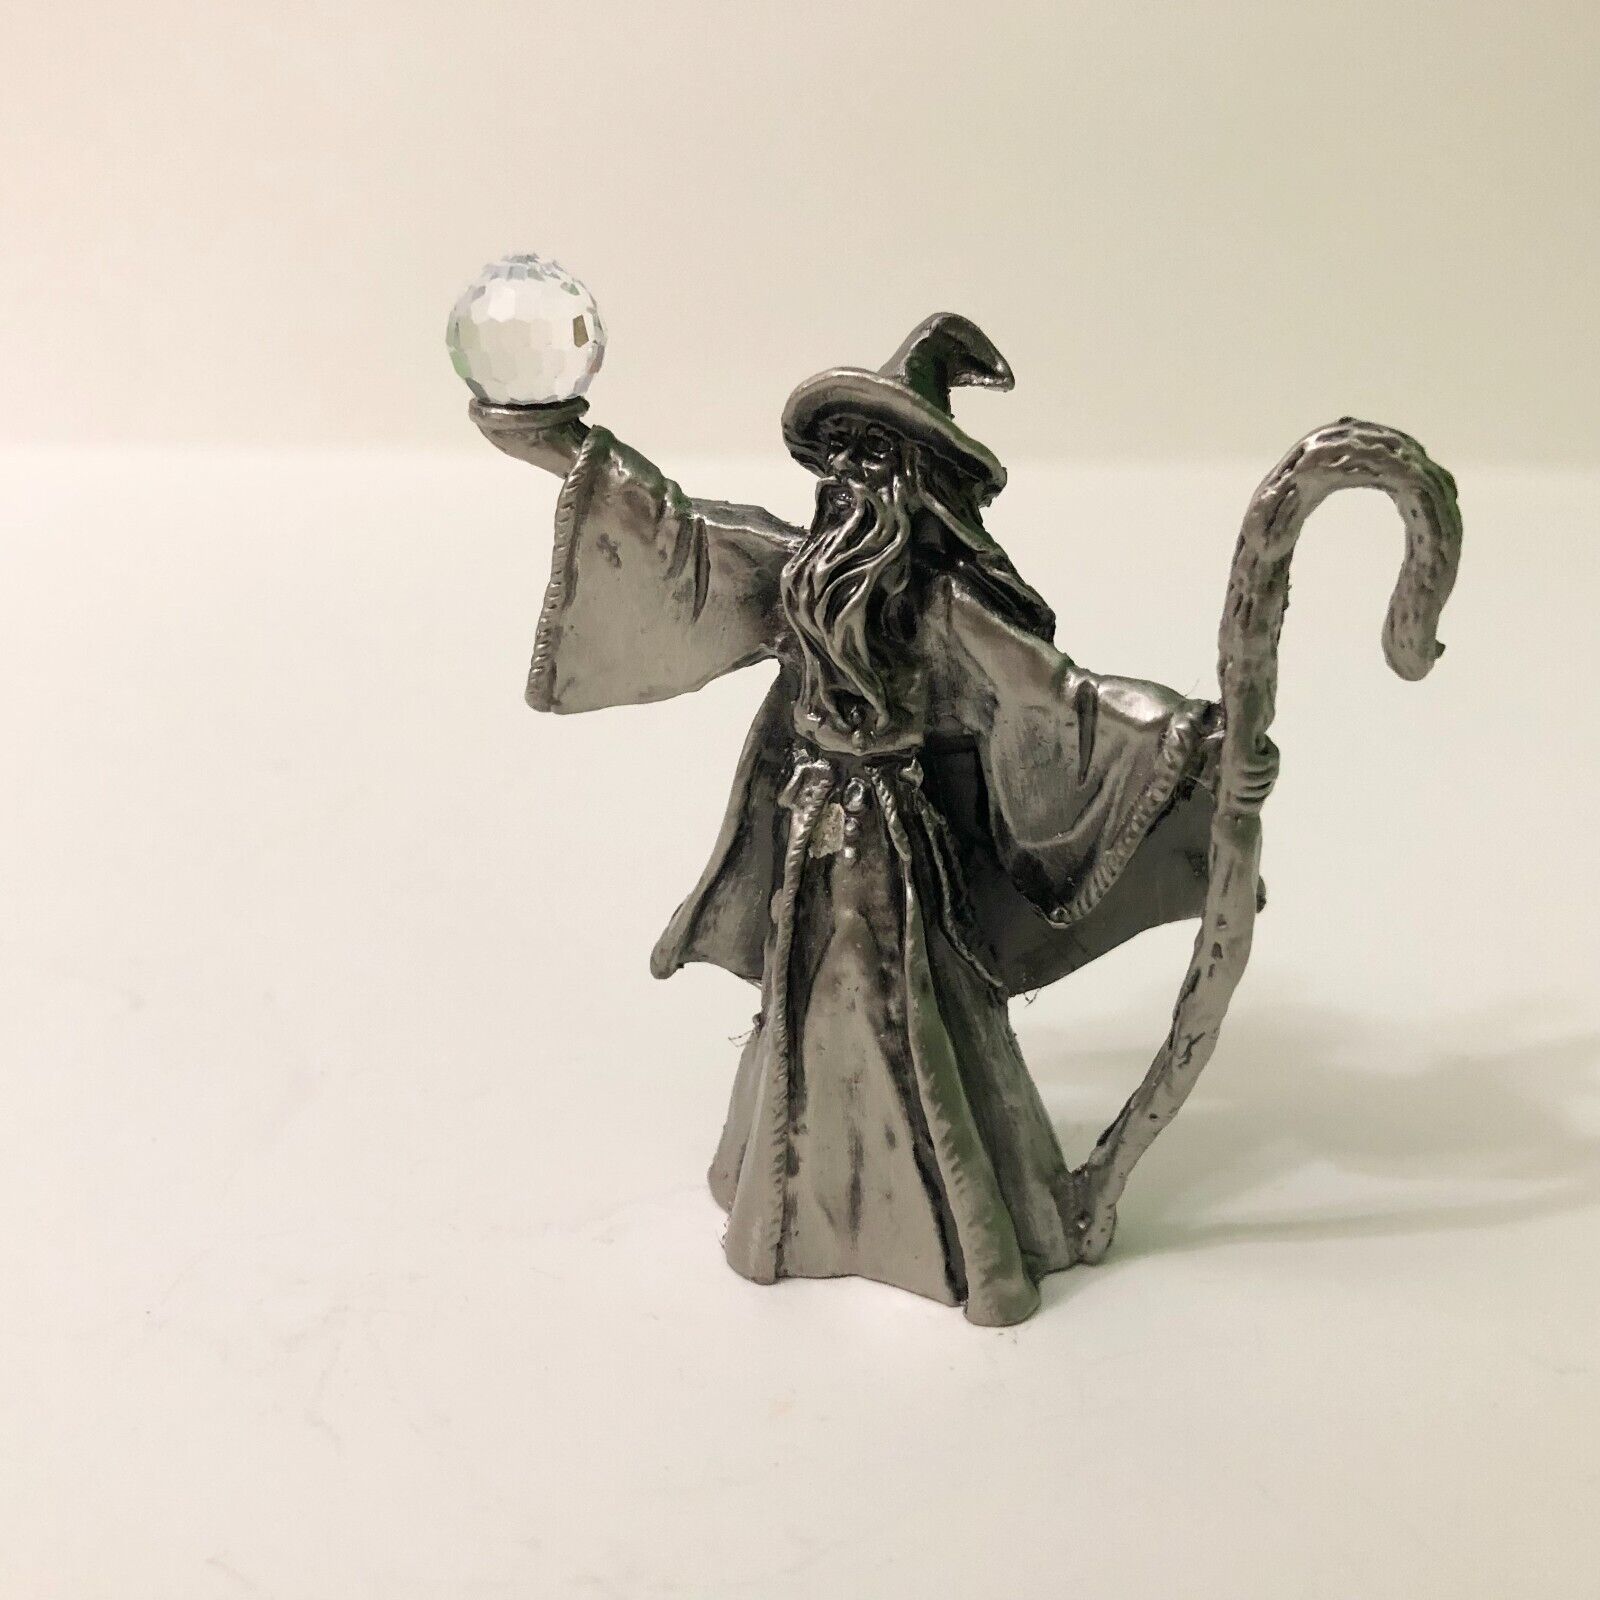 Vintage Wizard Crystal Ball Pewter Sculpture Figurine 2.5 Inch Tall